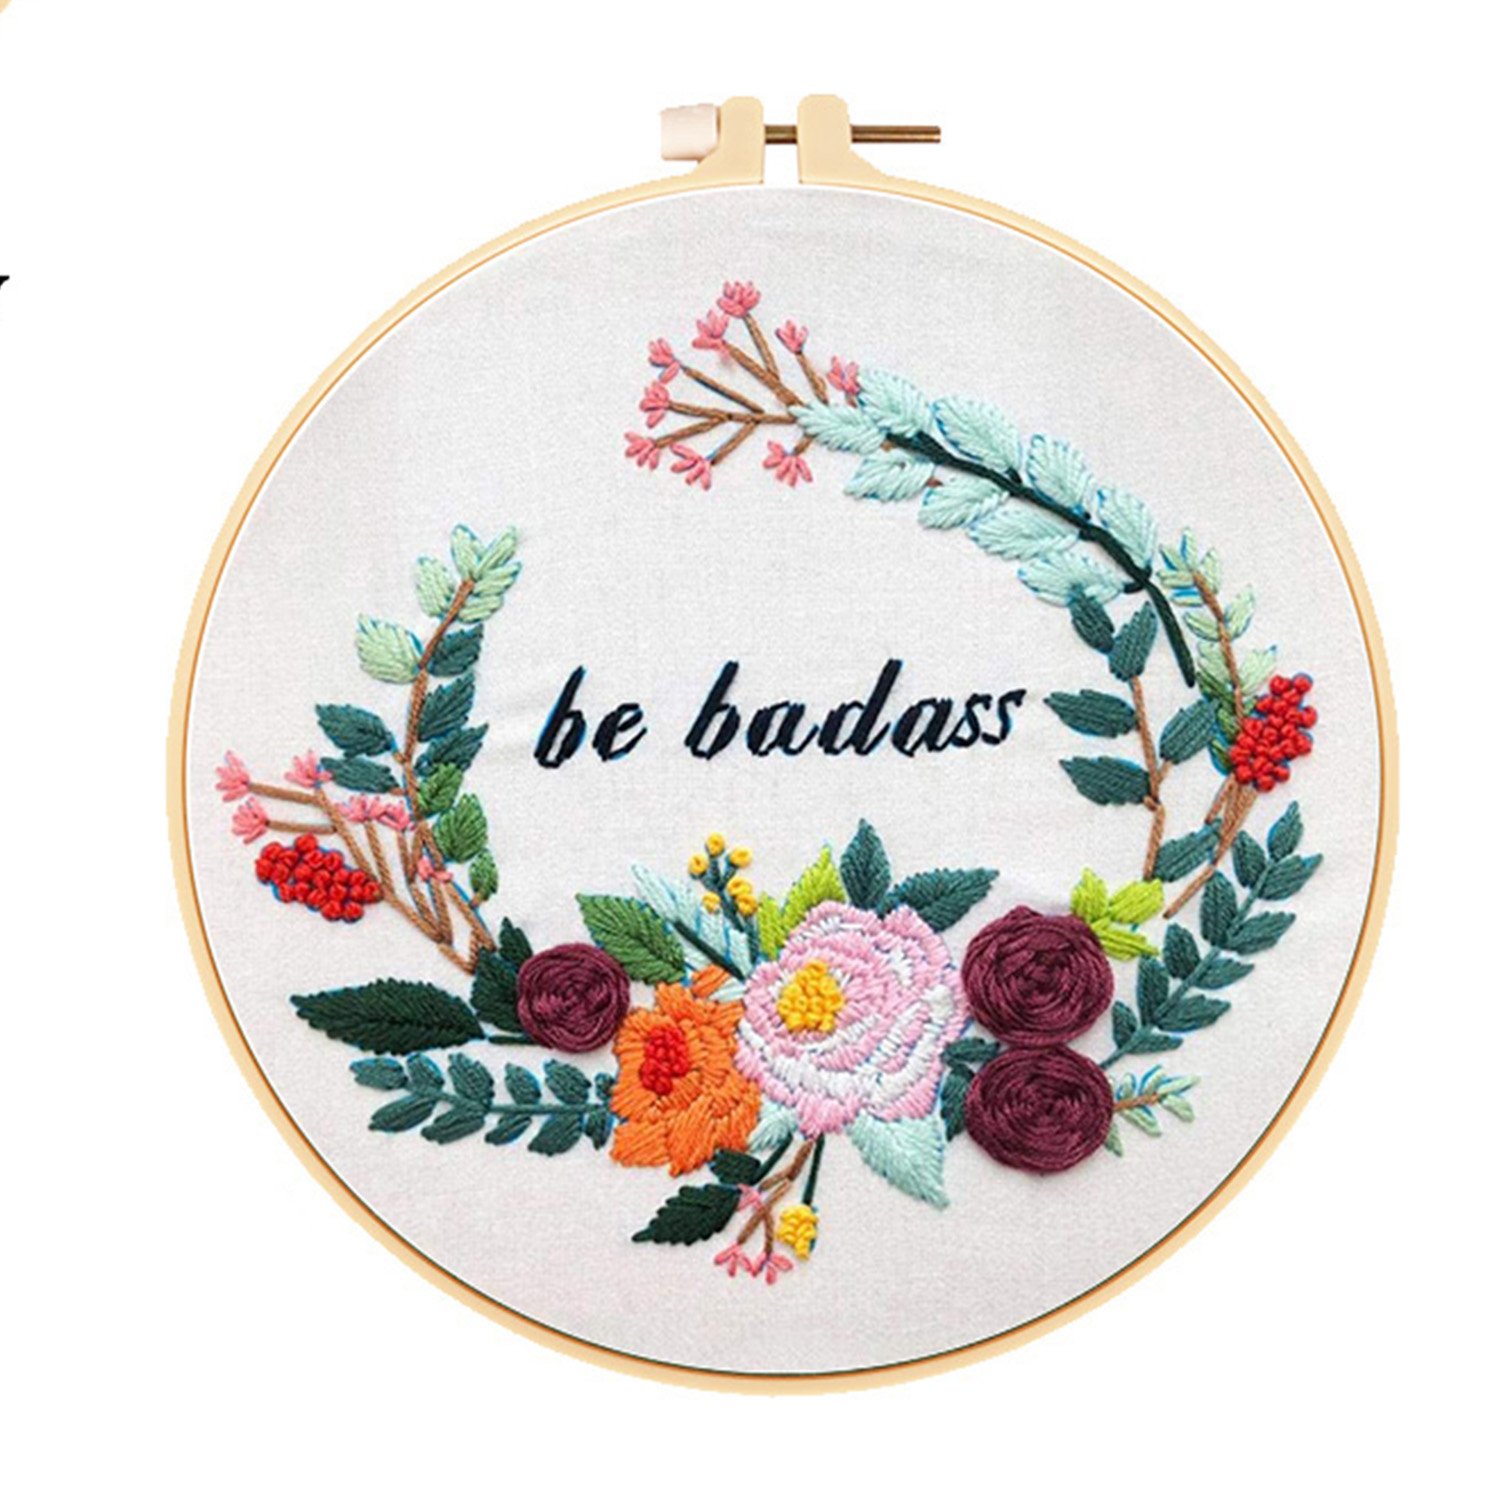 DIY Handmade Embroidery Cross stitch kit for beginner- Wreath with Funny Word Pattern